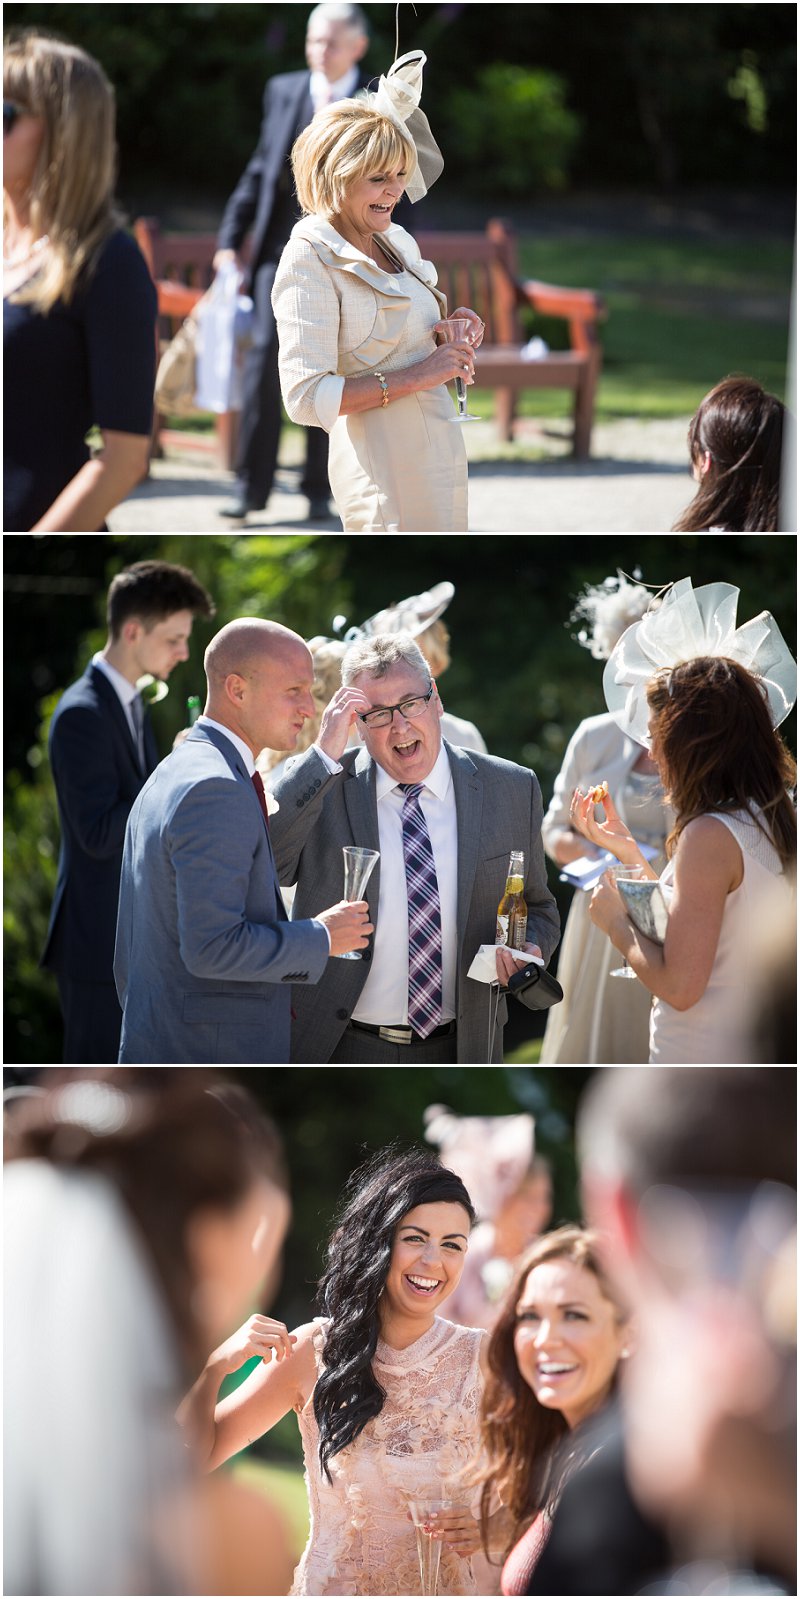 Guests enjoy themselves at Sefton Palm HOuse Wedding